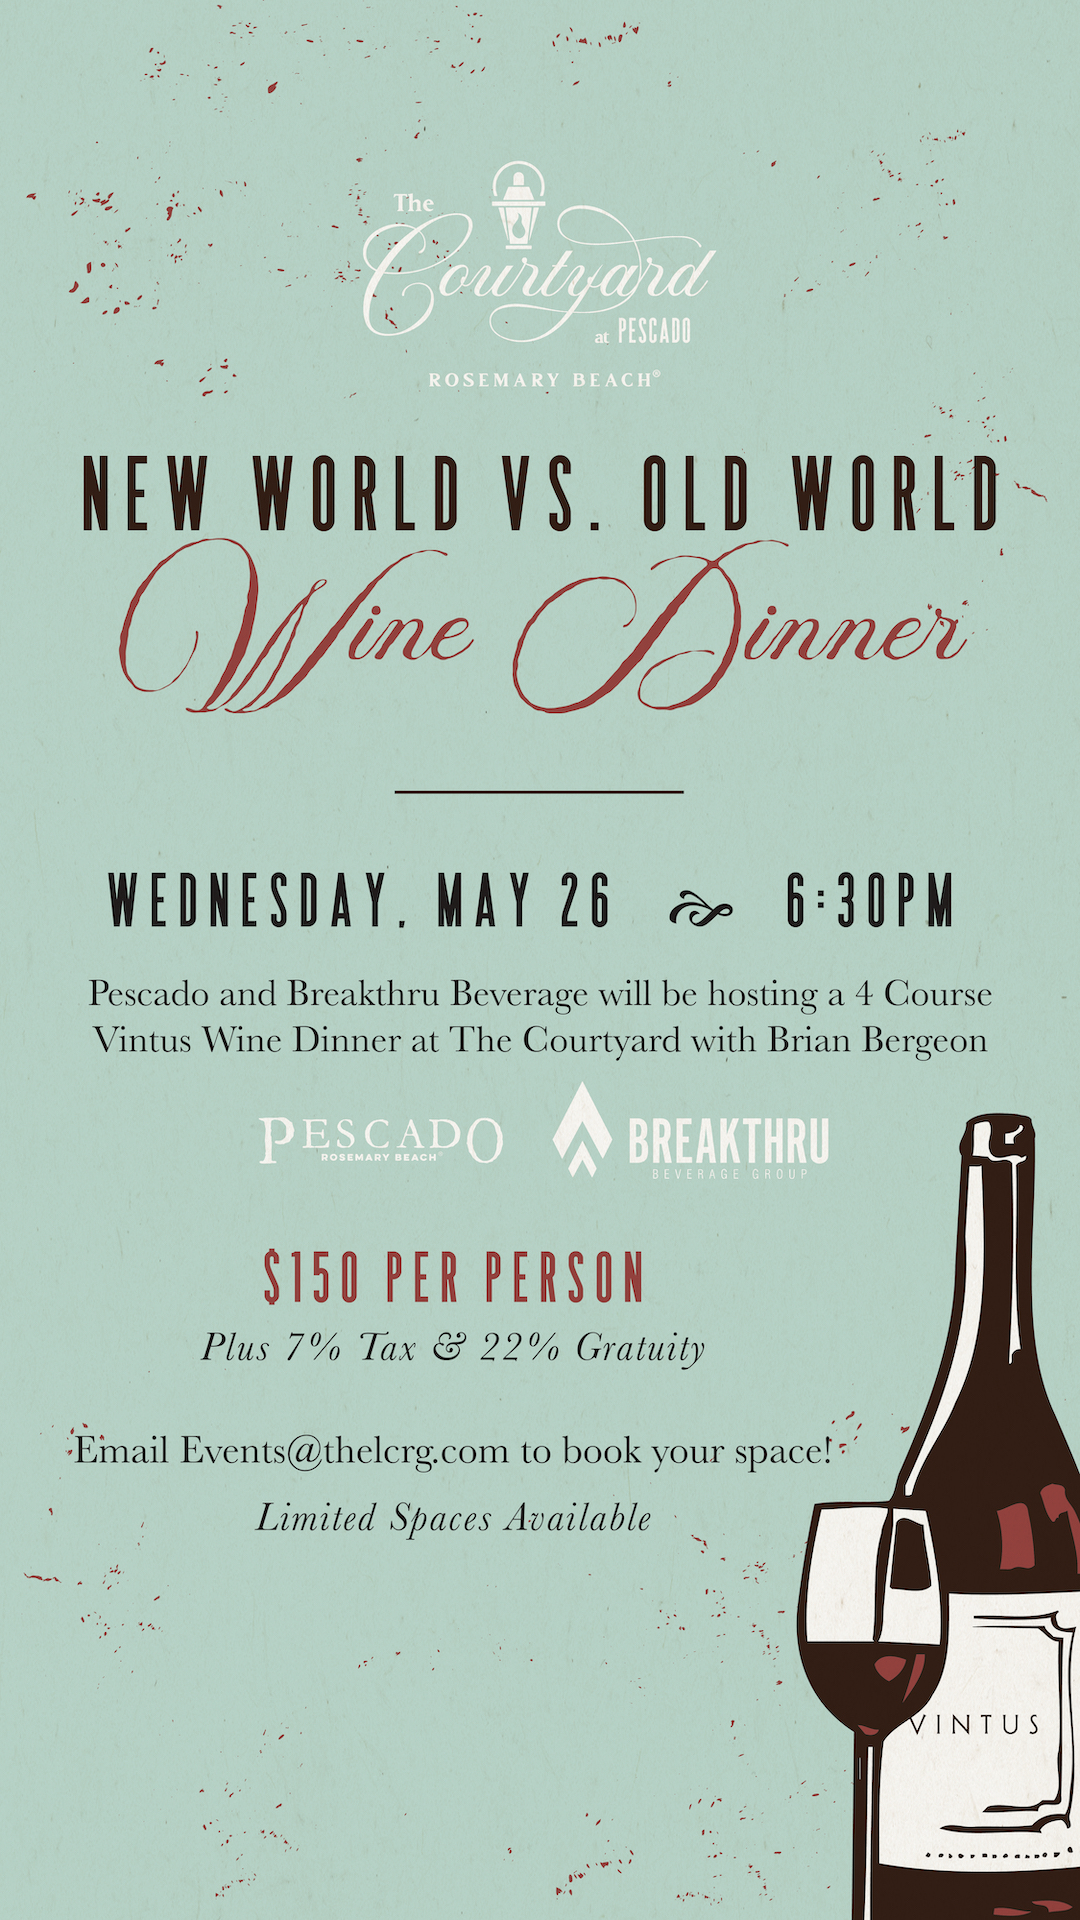 New World Vs. Old World Four Course Vintus Wine Dinner at The Courtyard at Pescado